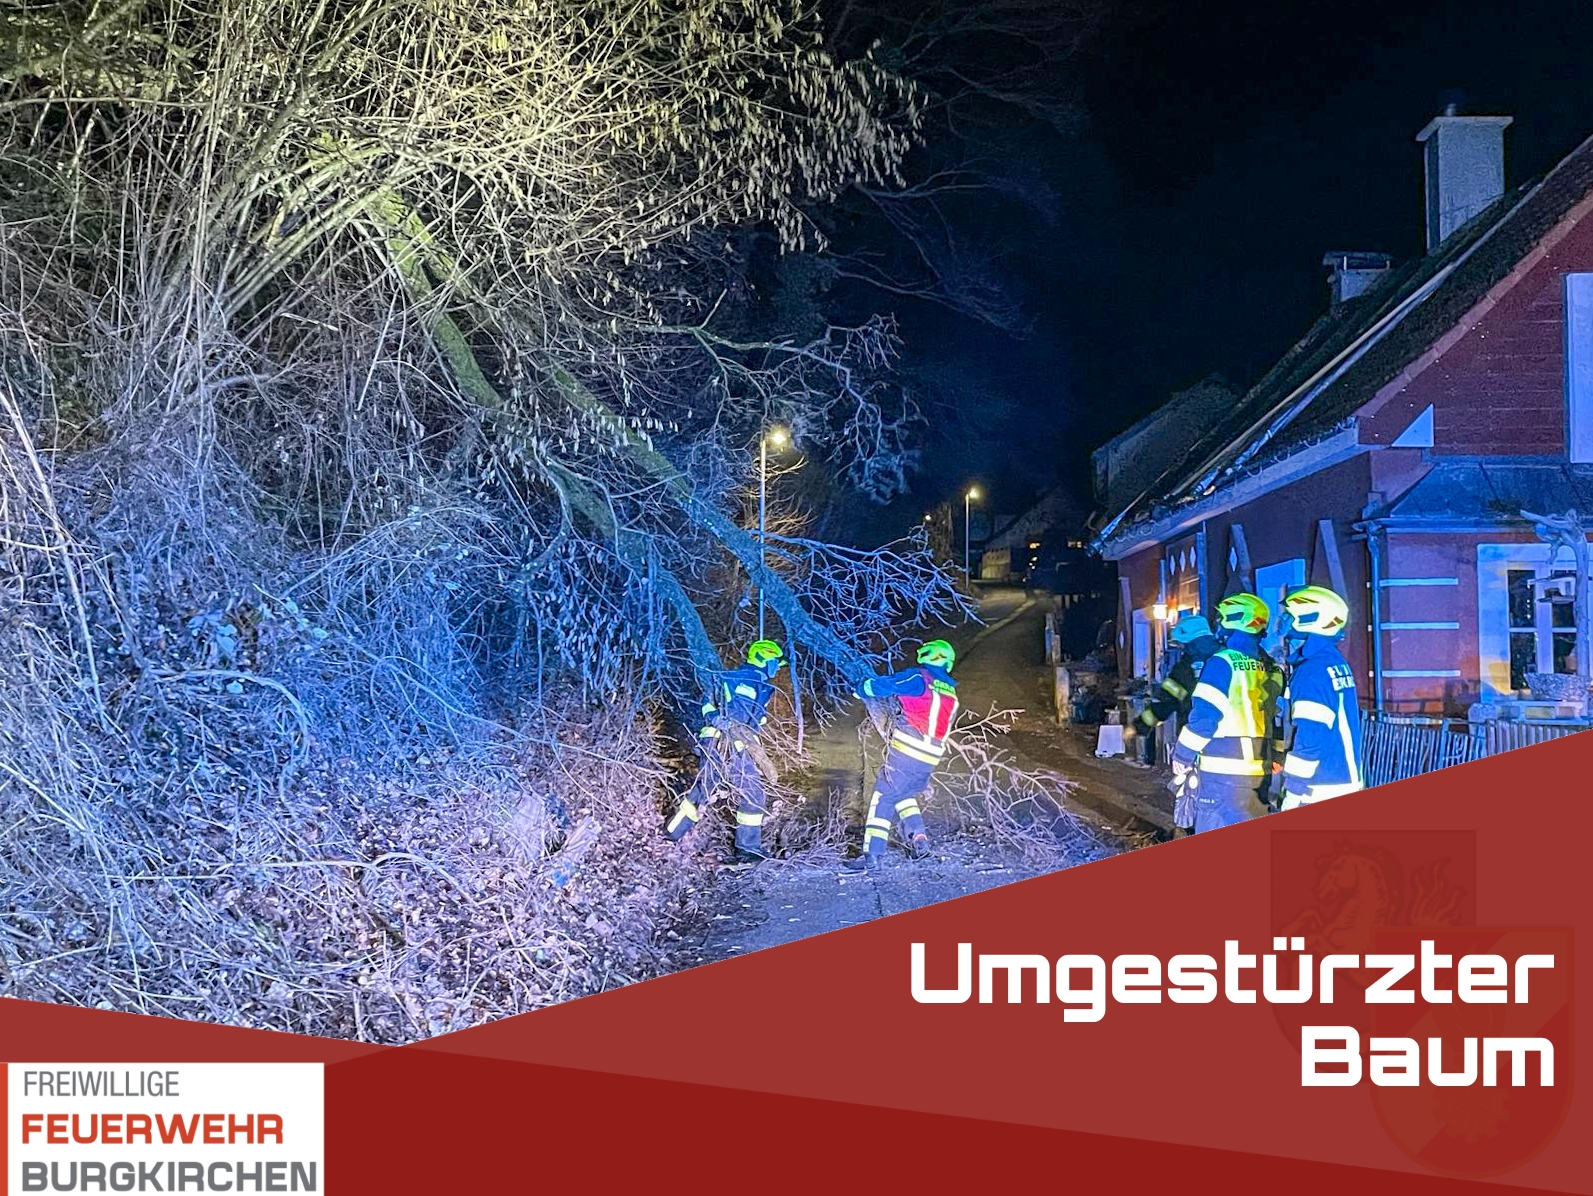 You are currently viewing Umgestürzter Baum